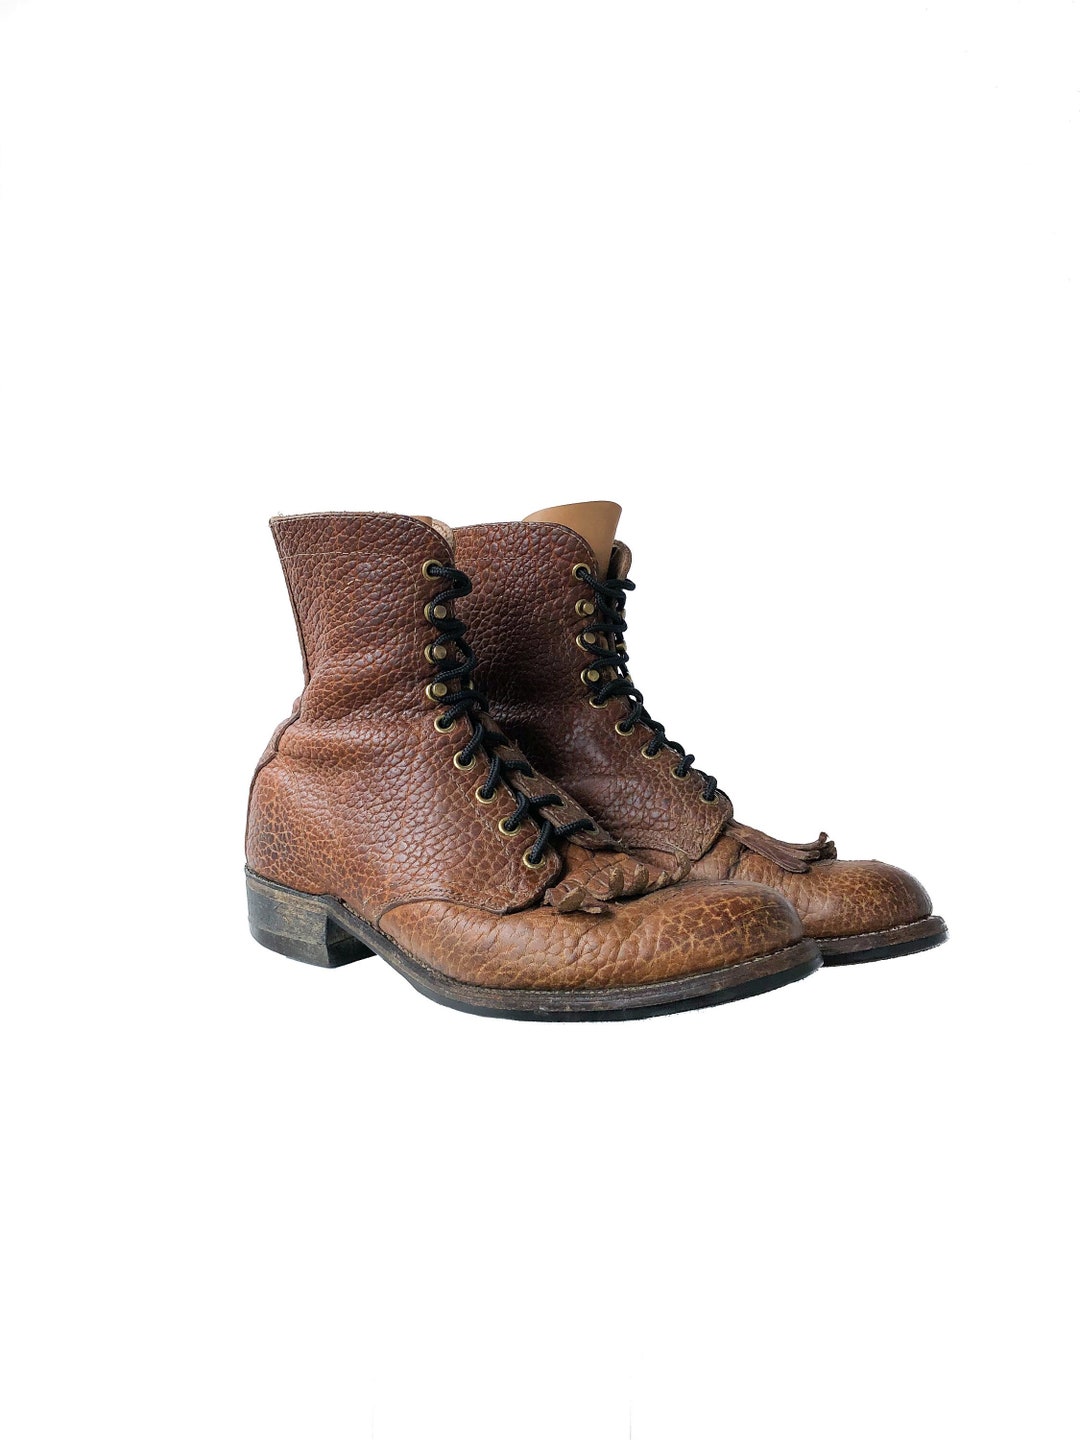 70s Textured Brown Leather Work Boots Tall Tassel Toe Lace up Brown ...